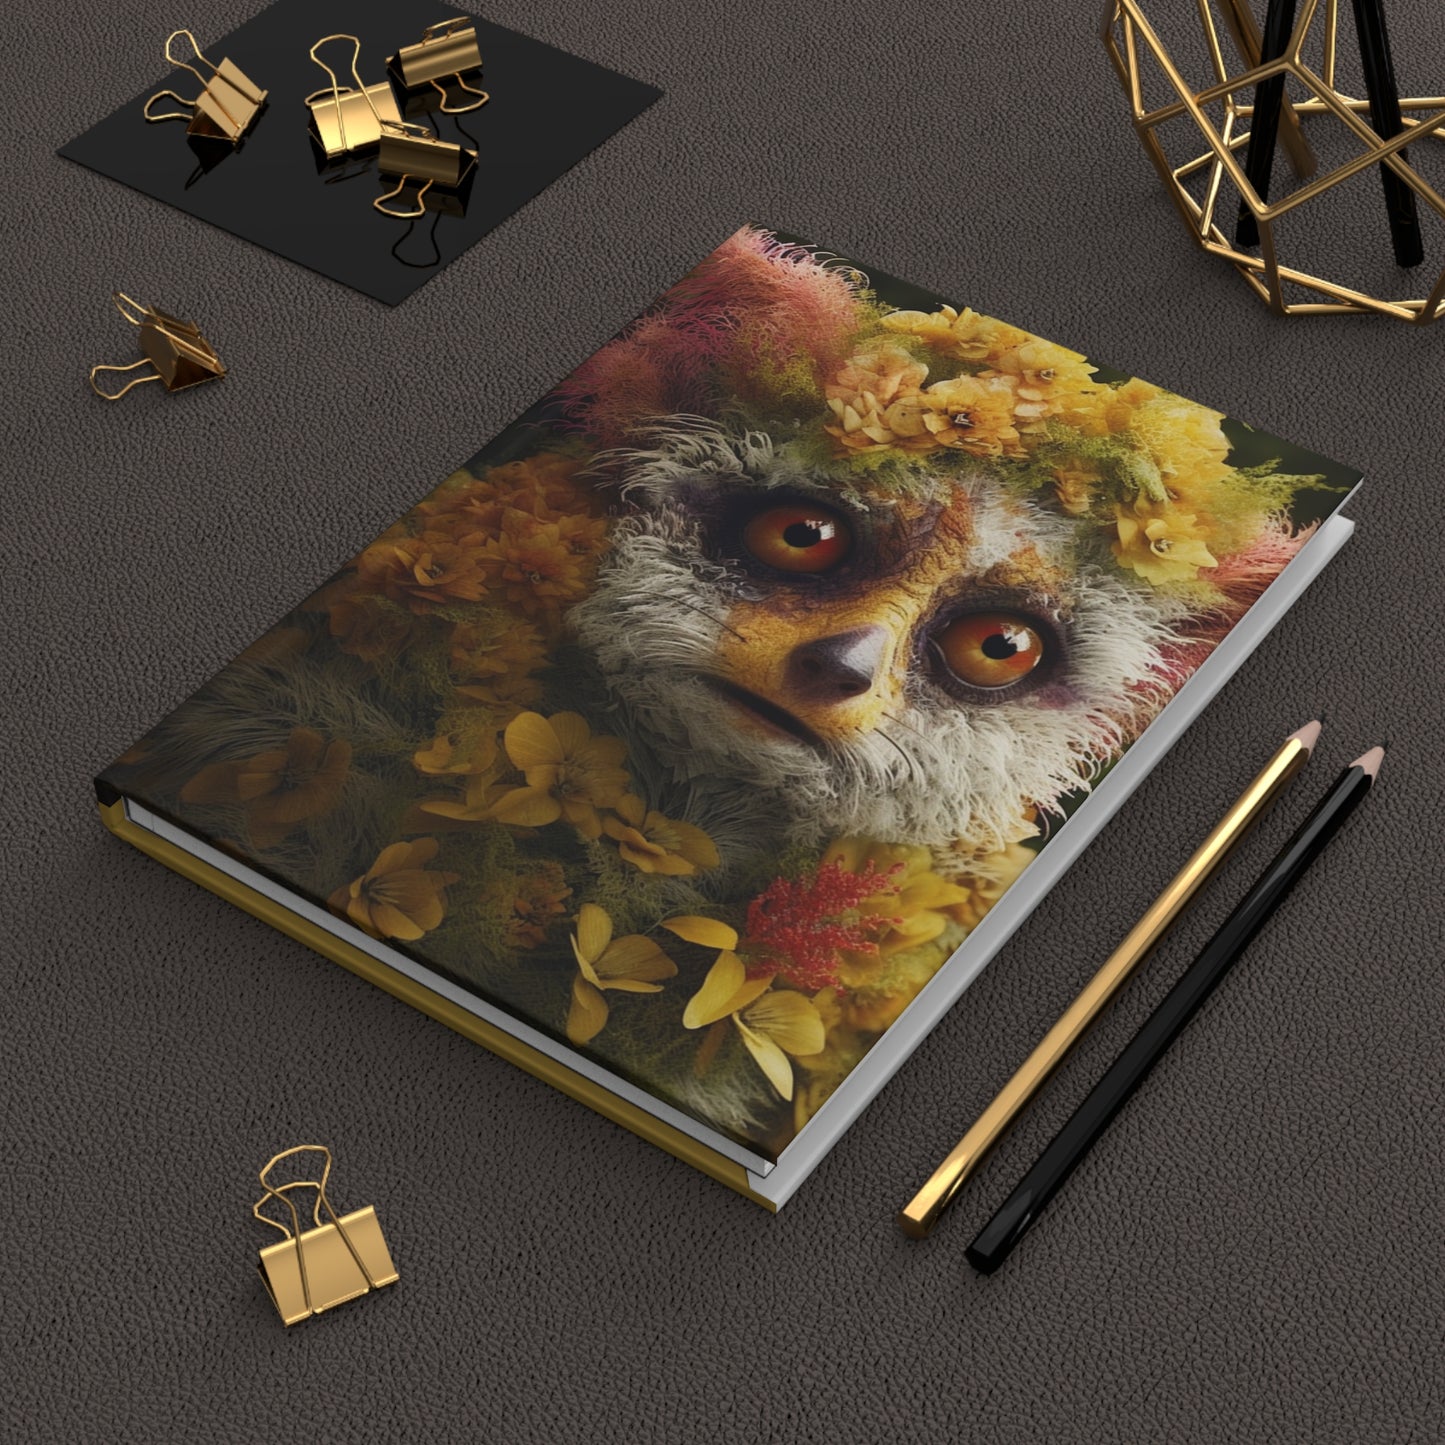 Floral Lemur Hardcover Notebook, Journal for Self Care, Gratitude, Wellness, and Affirmations, Lined Gift for Men and Women, 5.75"x7.5"